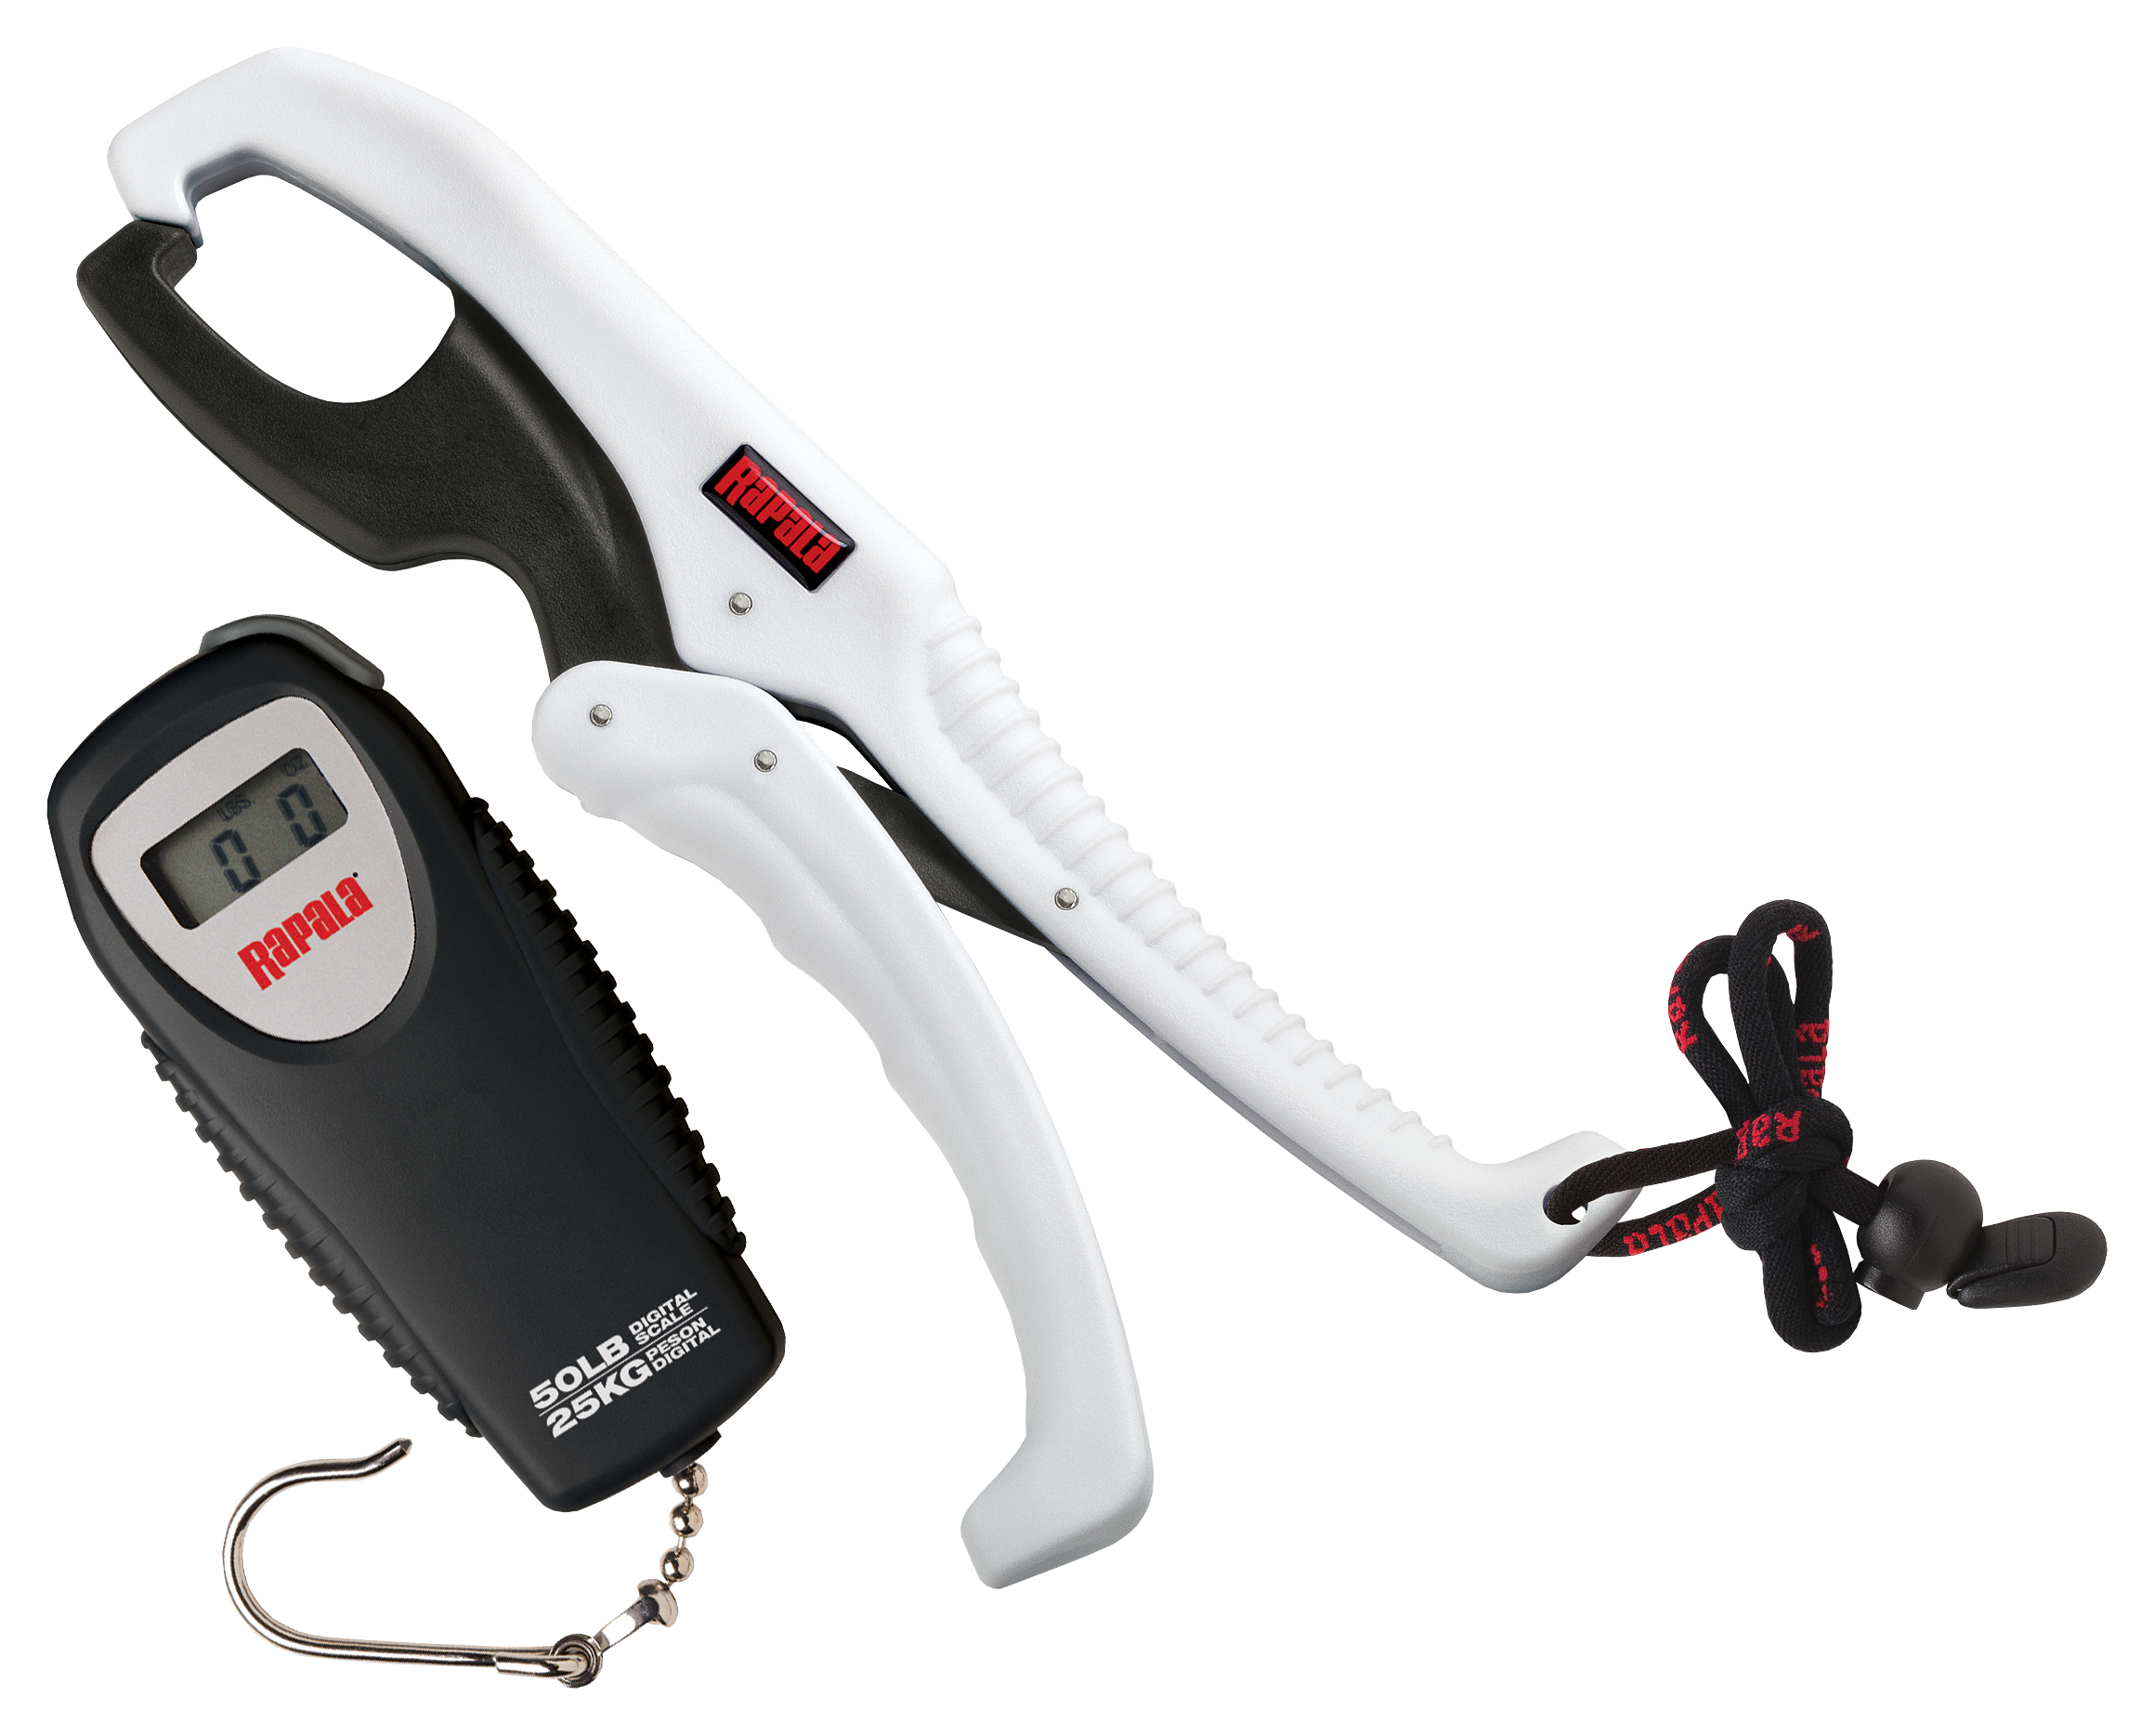 Rapala Compact Touch Digital Scales - £24.99